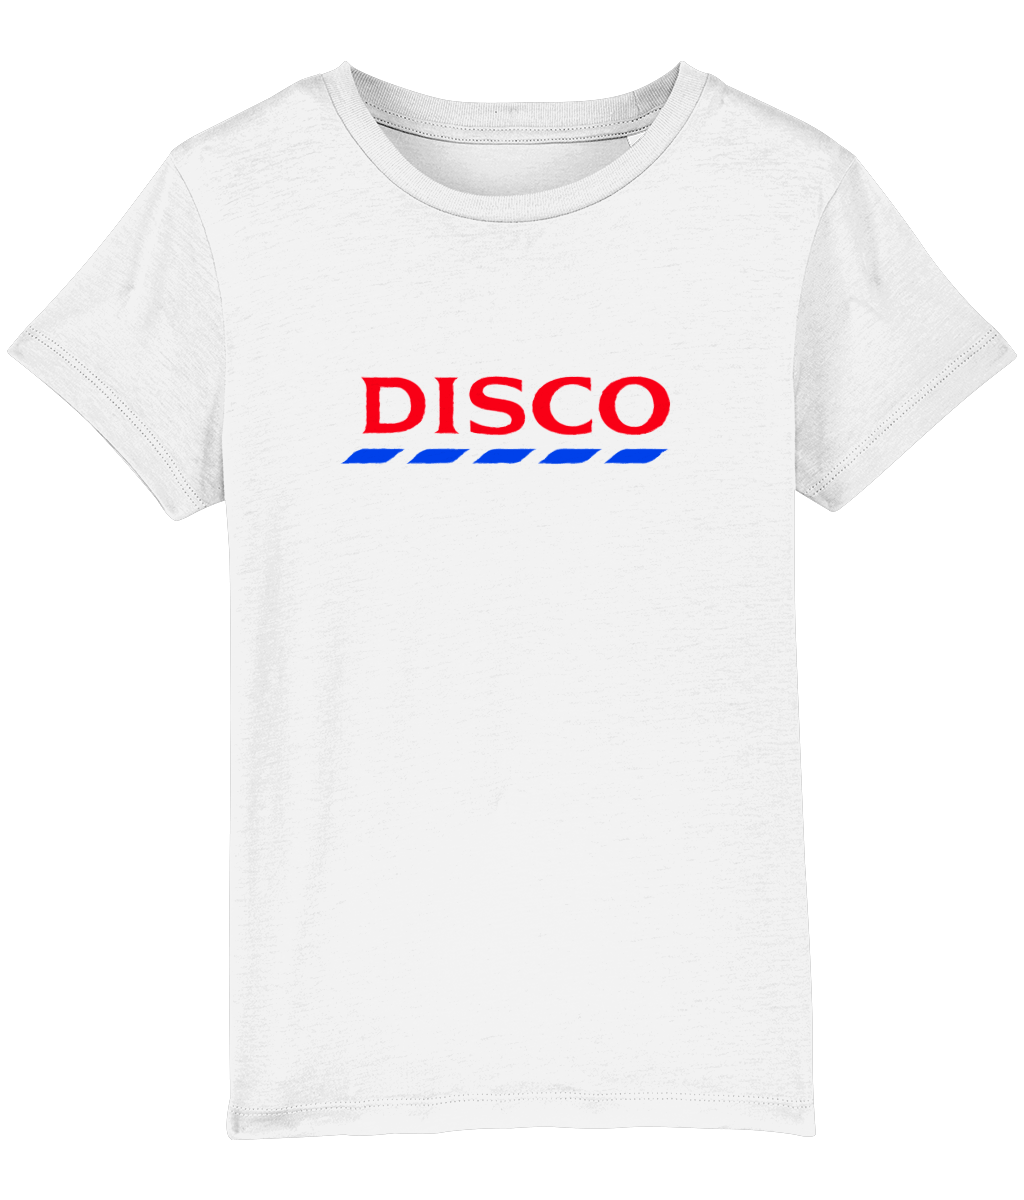 Introducing the Kids Disco Tshirt: The Fun and Sustainable Fashion Choice with Tesco-Inspired Style!